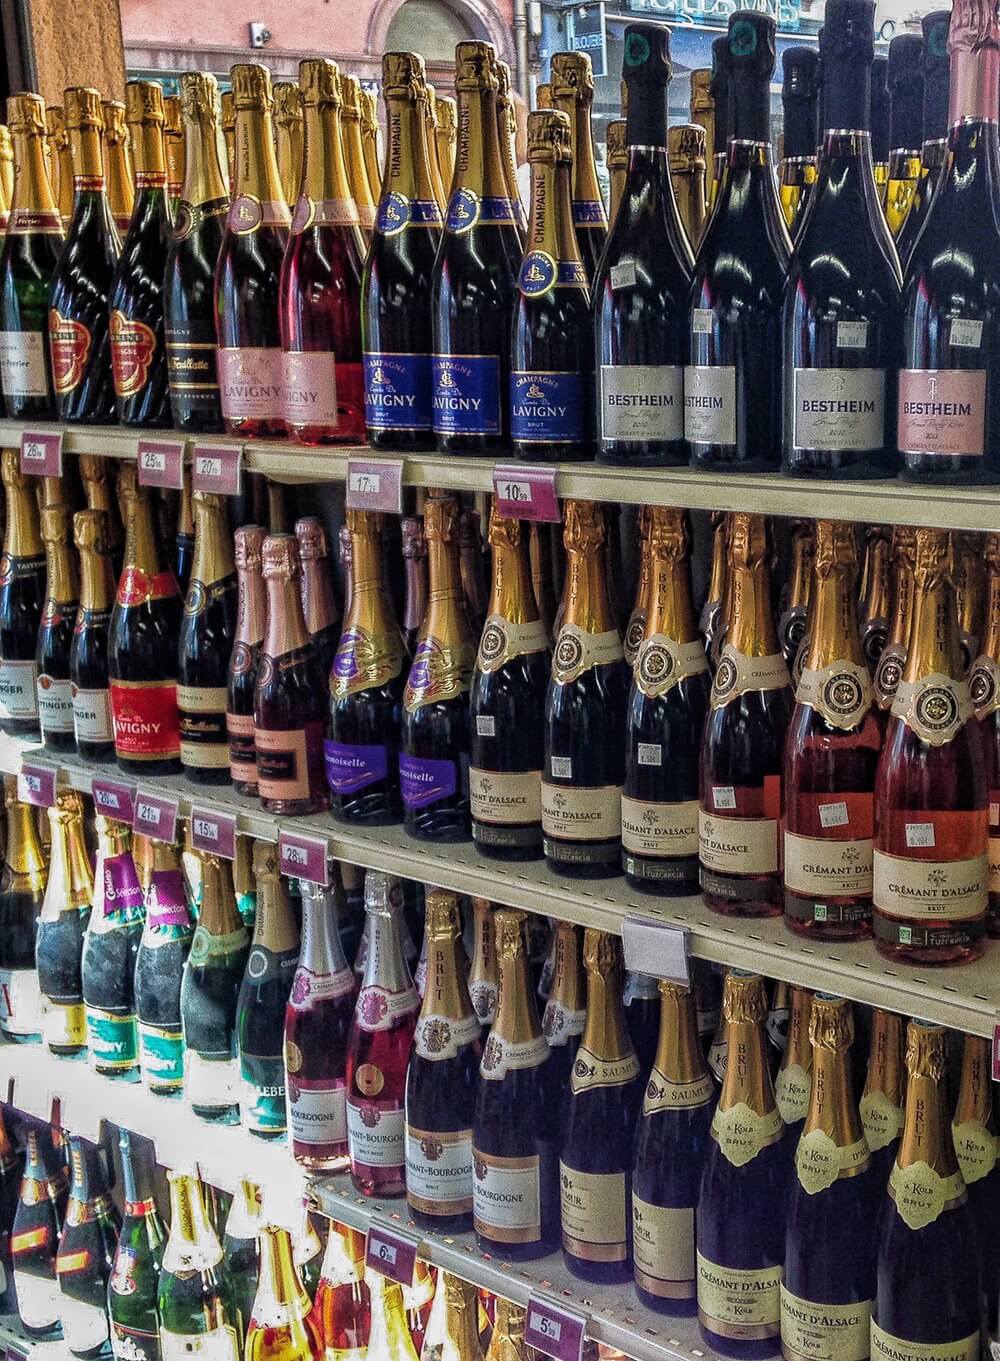 Visit Colmar: Bottles of champagne line the shelves in the grocery store